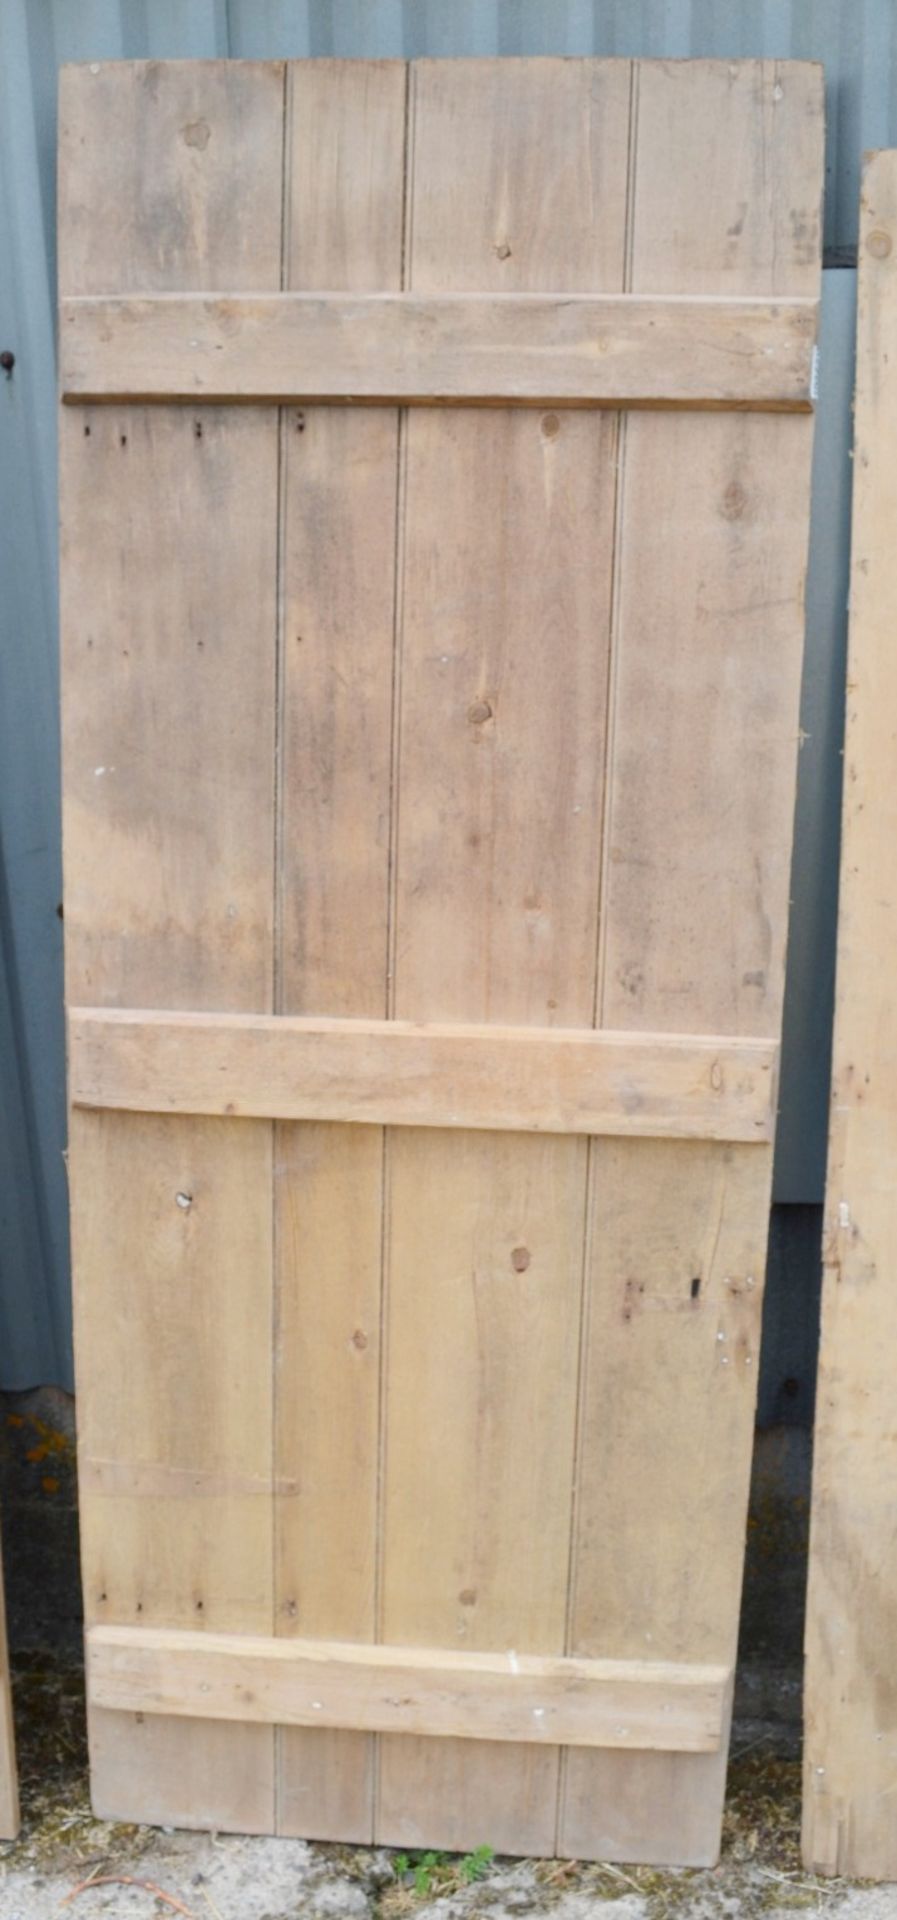 Set Of 4 x Reclaimed Unpainted Wooden Doors - Taken From A Grade II Listed Property - Image 3 of 8